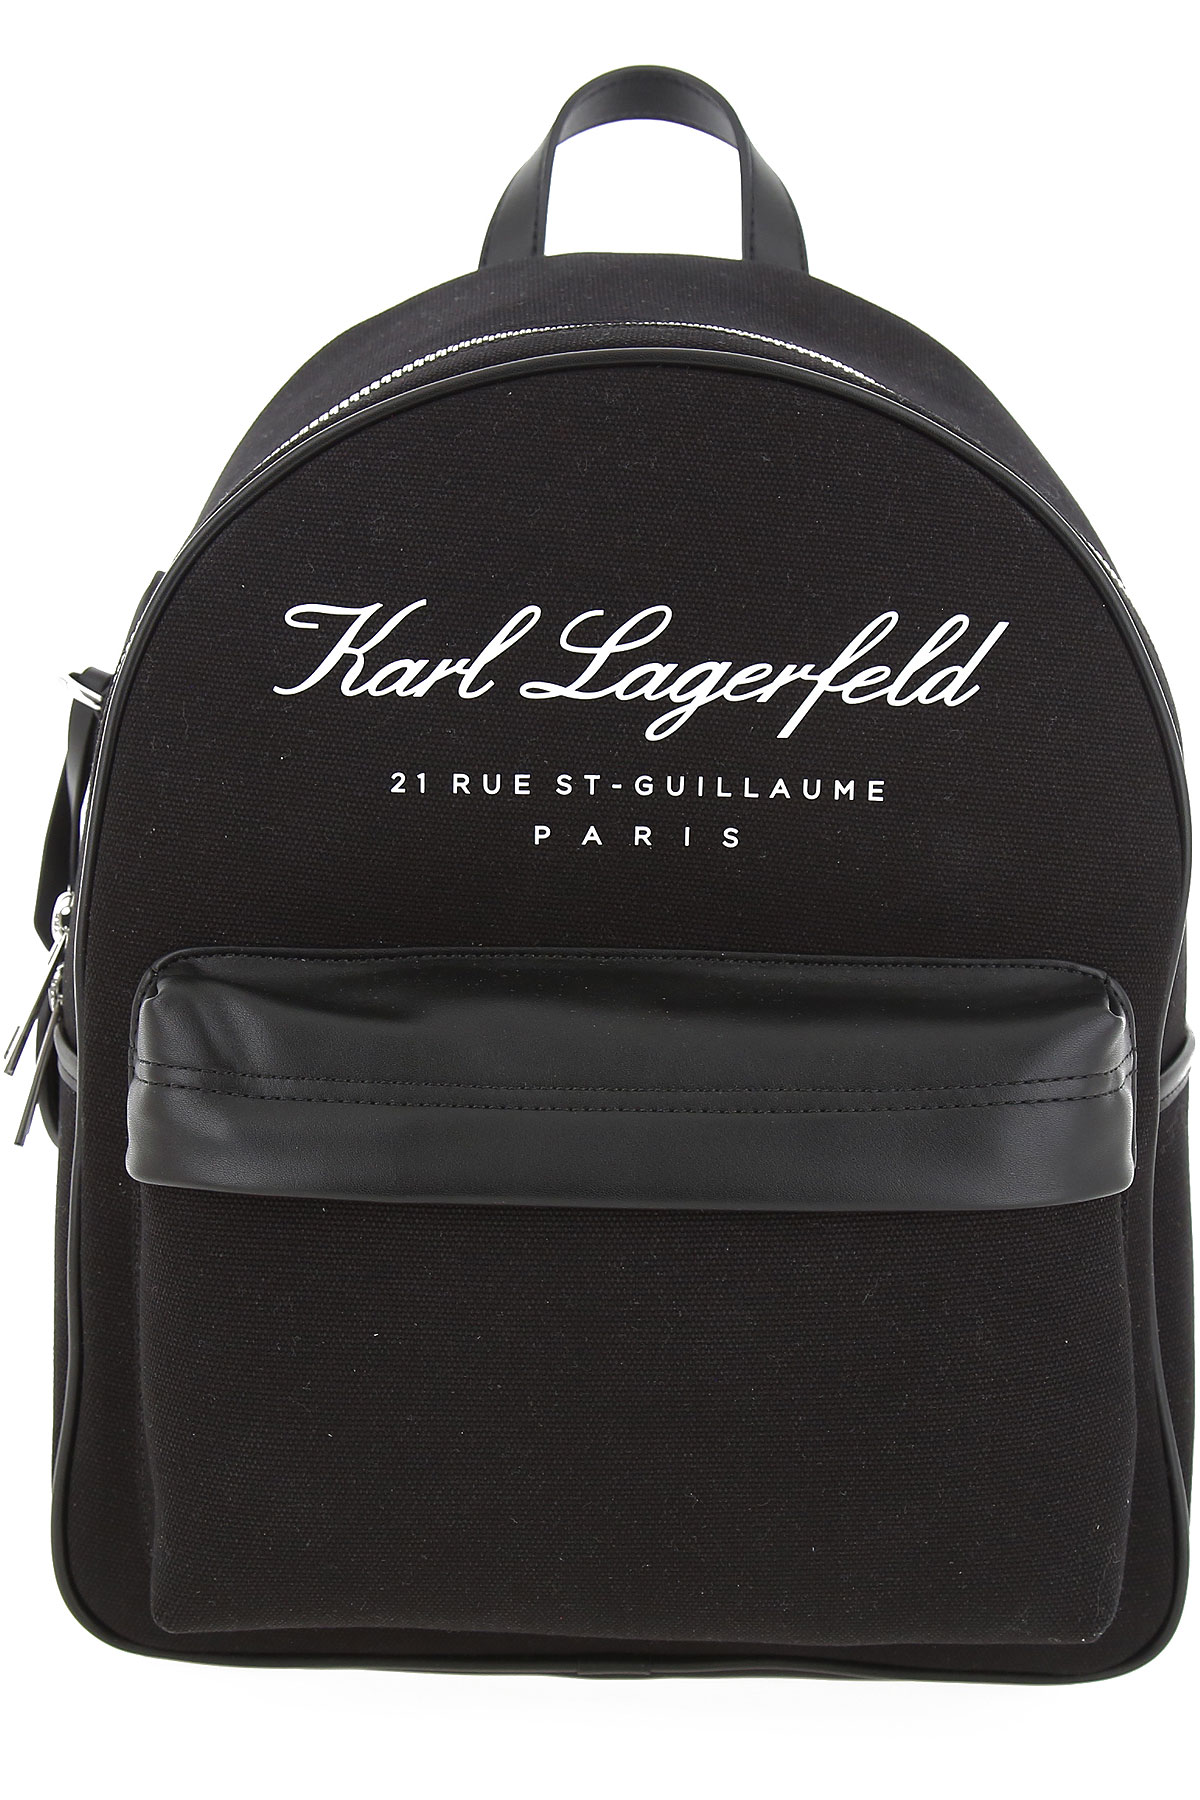 Karl Lagerfeld Backpack FOR SALE! - PicClick UK